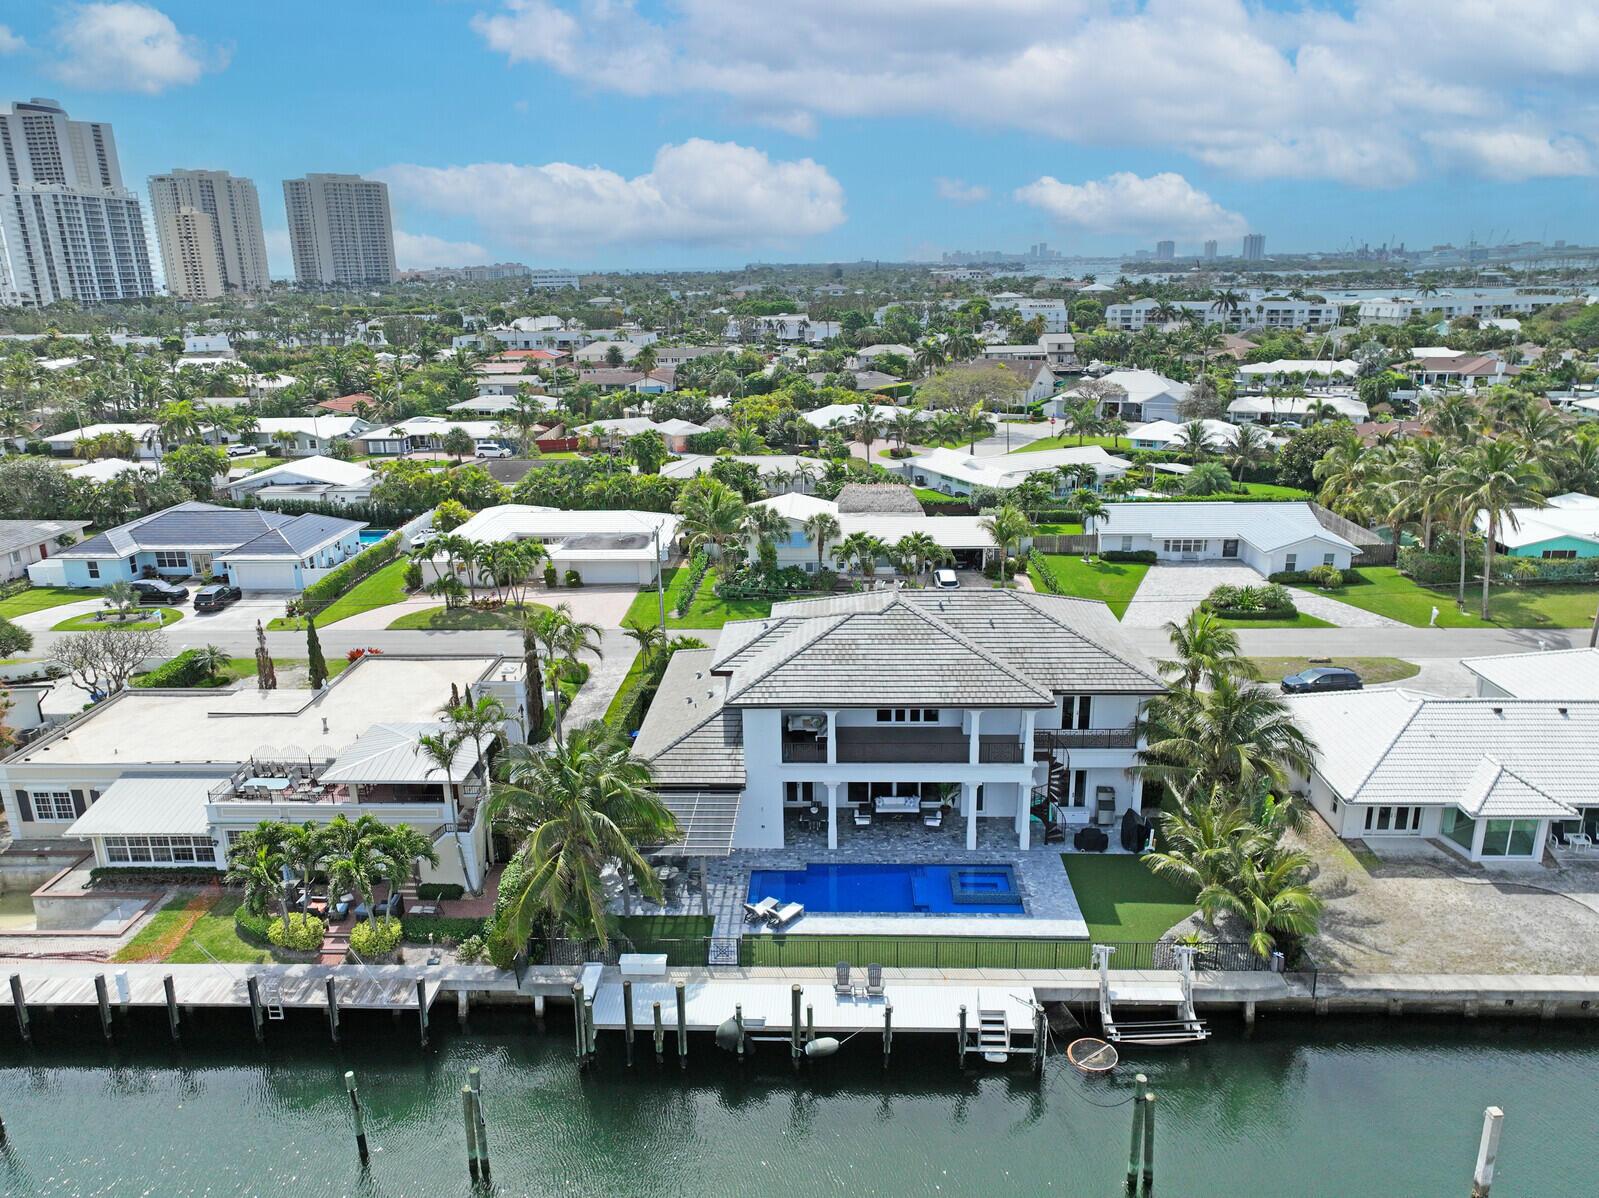 Built in 2019, this upgraded home sits on an expansive .25 acre intracoastal waterfront lot, fulfilling every boater's or water enthusiast's fantasy with 100' of waterfrontage, perfect for up to an 80' yacht thanks to the deep water and wide channel. Nestled on Bimini Lane, homes here offer deeded beach access. Step through grand oversized entry doors into a realm of opulence across an open floor plan. Gaze through rear sliding glass doors to behold your dream water vista beyond the pool and vanishing edge spa. This home boasts over 4,200 sq ft of AC living space and over 6,000 sq ft of total area, featuring 5 large BR'S and 5.5 BA'S. The first floor encompasses a master suite, formal dining area, laundry room, powder bath, and a private cabana suite with a large covered lanai. Ascend to the second floor via stairs or private elevator to find a secondary master suite, wet bar area, two guest suites, a media loft, covered lanai, and washer/dryer unit. Craftsmanship shines with high-end plumbing and electrical fixtures, a Sub-zero appliance package including an oversized refrigerator and natural gas cooktop in the kitchen. Revel in outdoor gatherings with the outdoor kitchen and natural gas grill. Full house generator! Experience award-winning craftsmanship and transform this residence into your personal sanctuary. Singer Island beckons as paradise awaits your arrival.